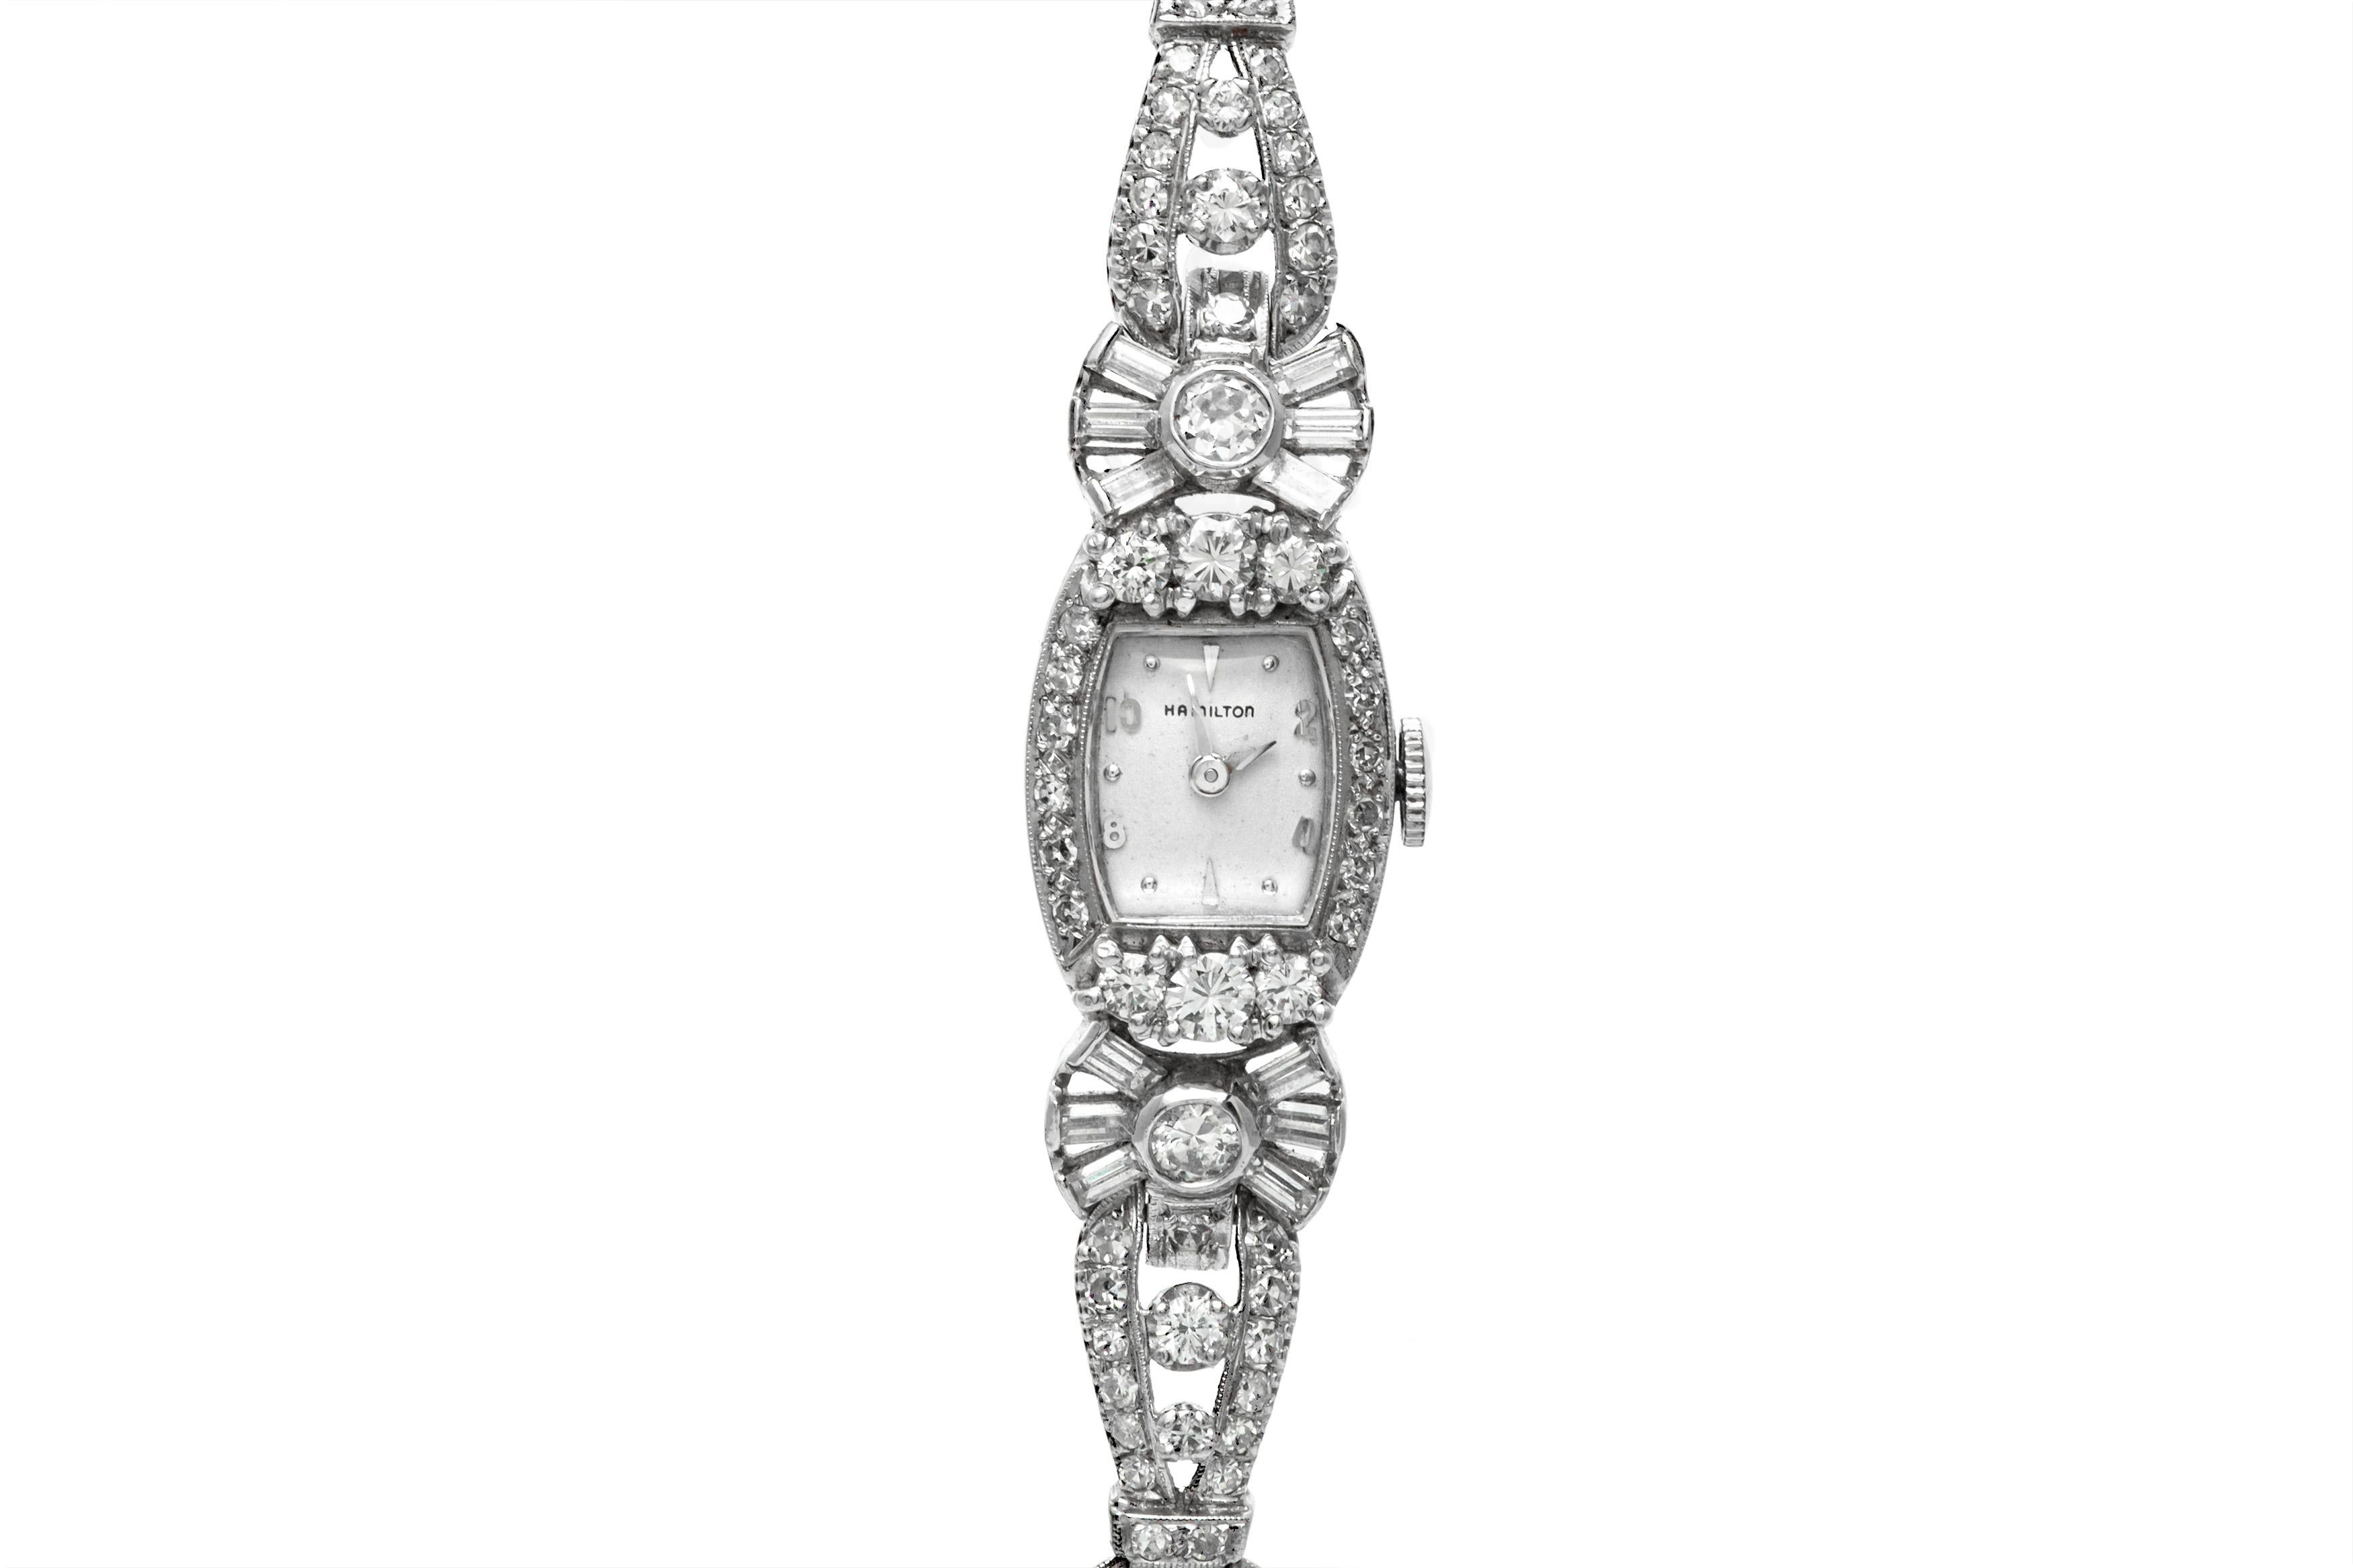 Hamilton watch, finely crafted in platinum with diamonds weighing approximately a total of 8.00 carat. Circa 1930's.